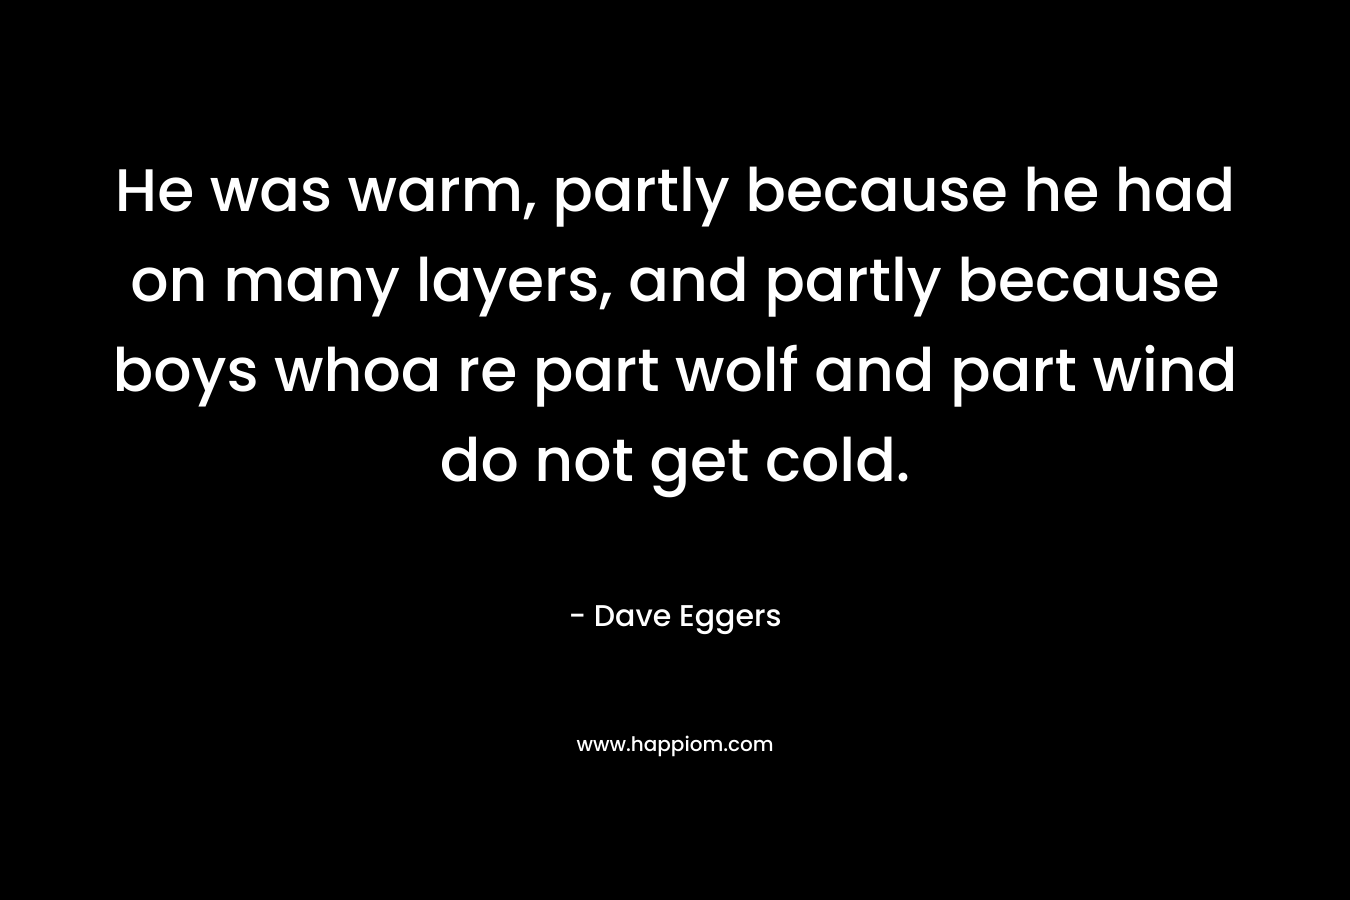 He was warm, partly because he had on many layers, and partly because boys whoa re part wolf and part wind do not get cold. – Dave Eggers